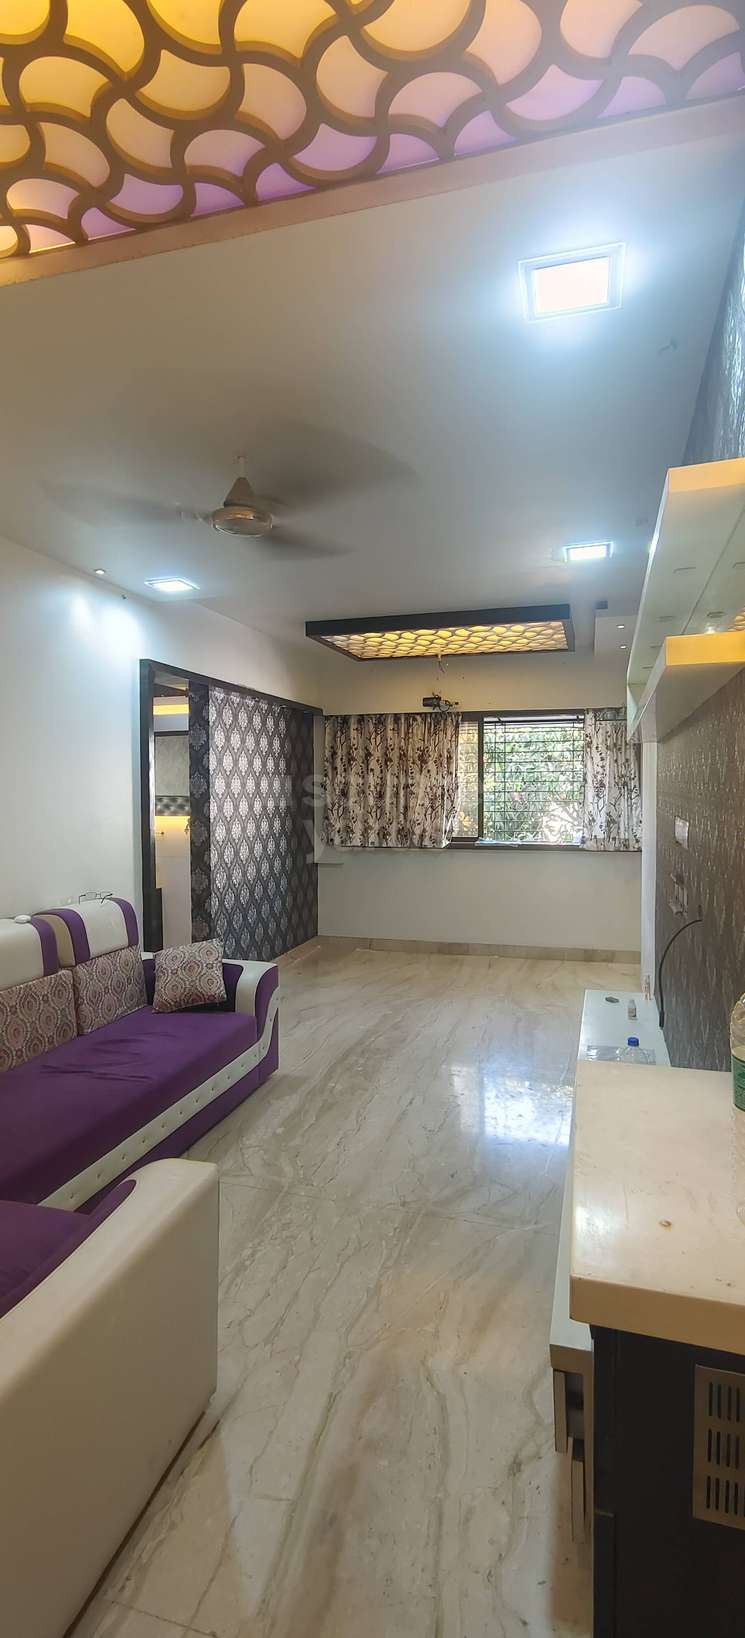 3 Bedroom 570 Sq.Ft. Apartment in Dombivli Thane